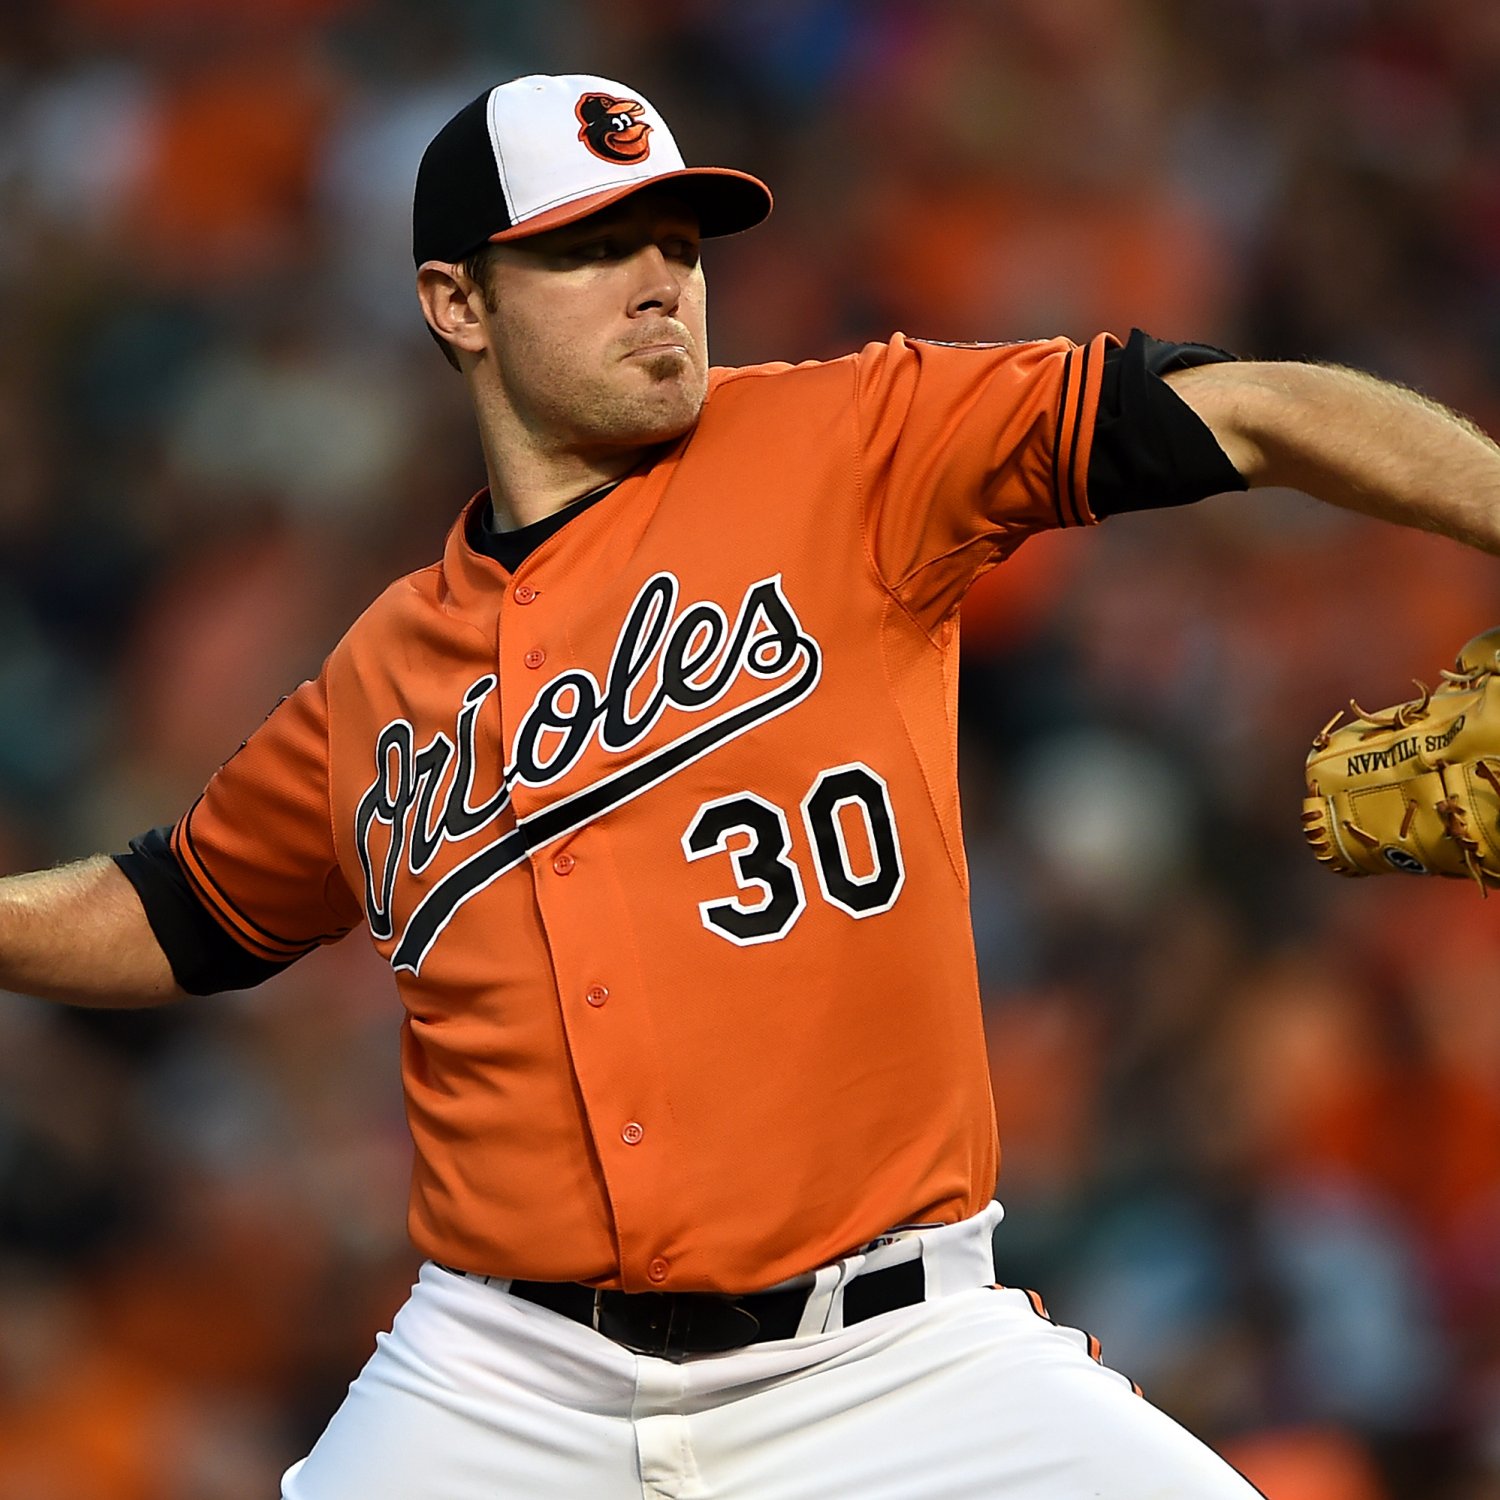 Detroit Tigers vs. Baltimore Orioles Game 1 Live Score and Highlights